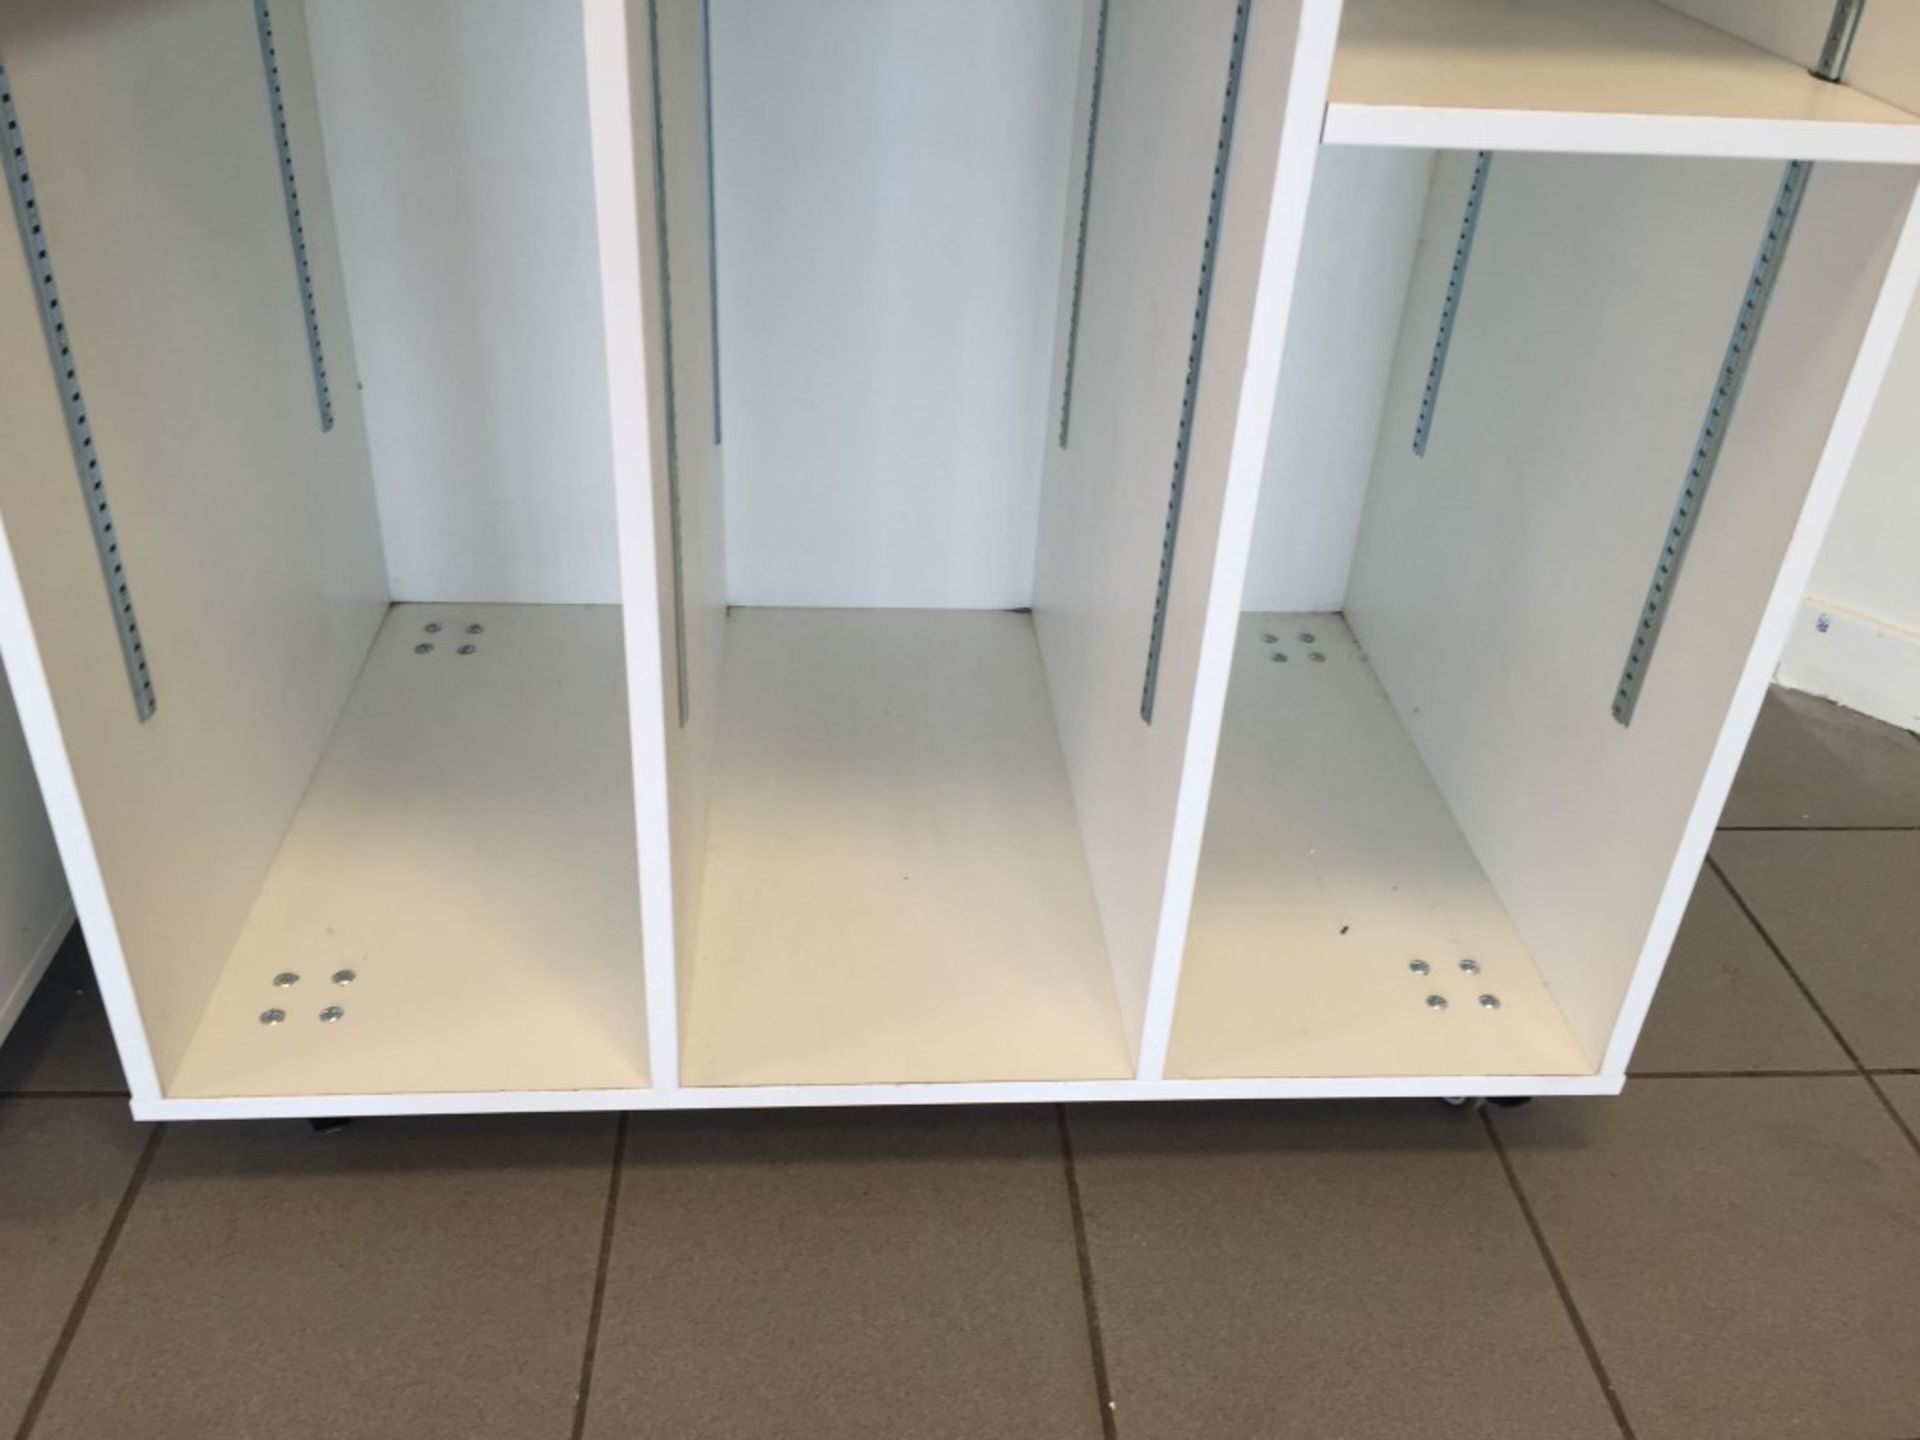 2 x Substantial Mobile Floor Display Cabinets with adjustable height shelving - Wheels under have - Image 5 of 14